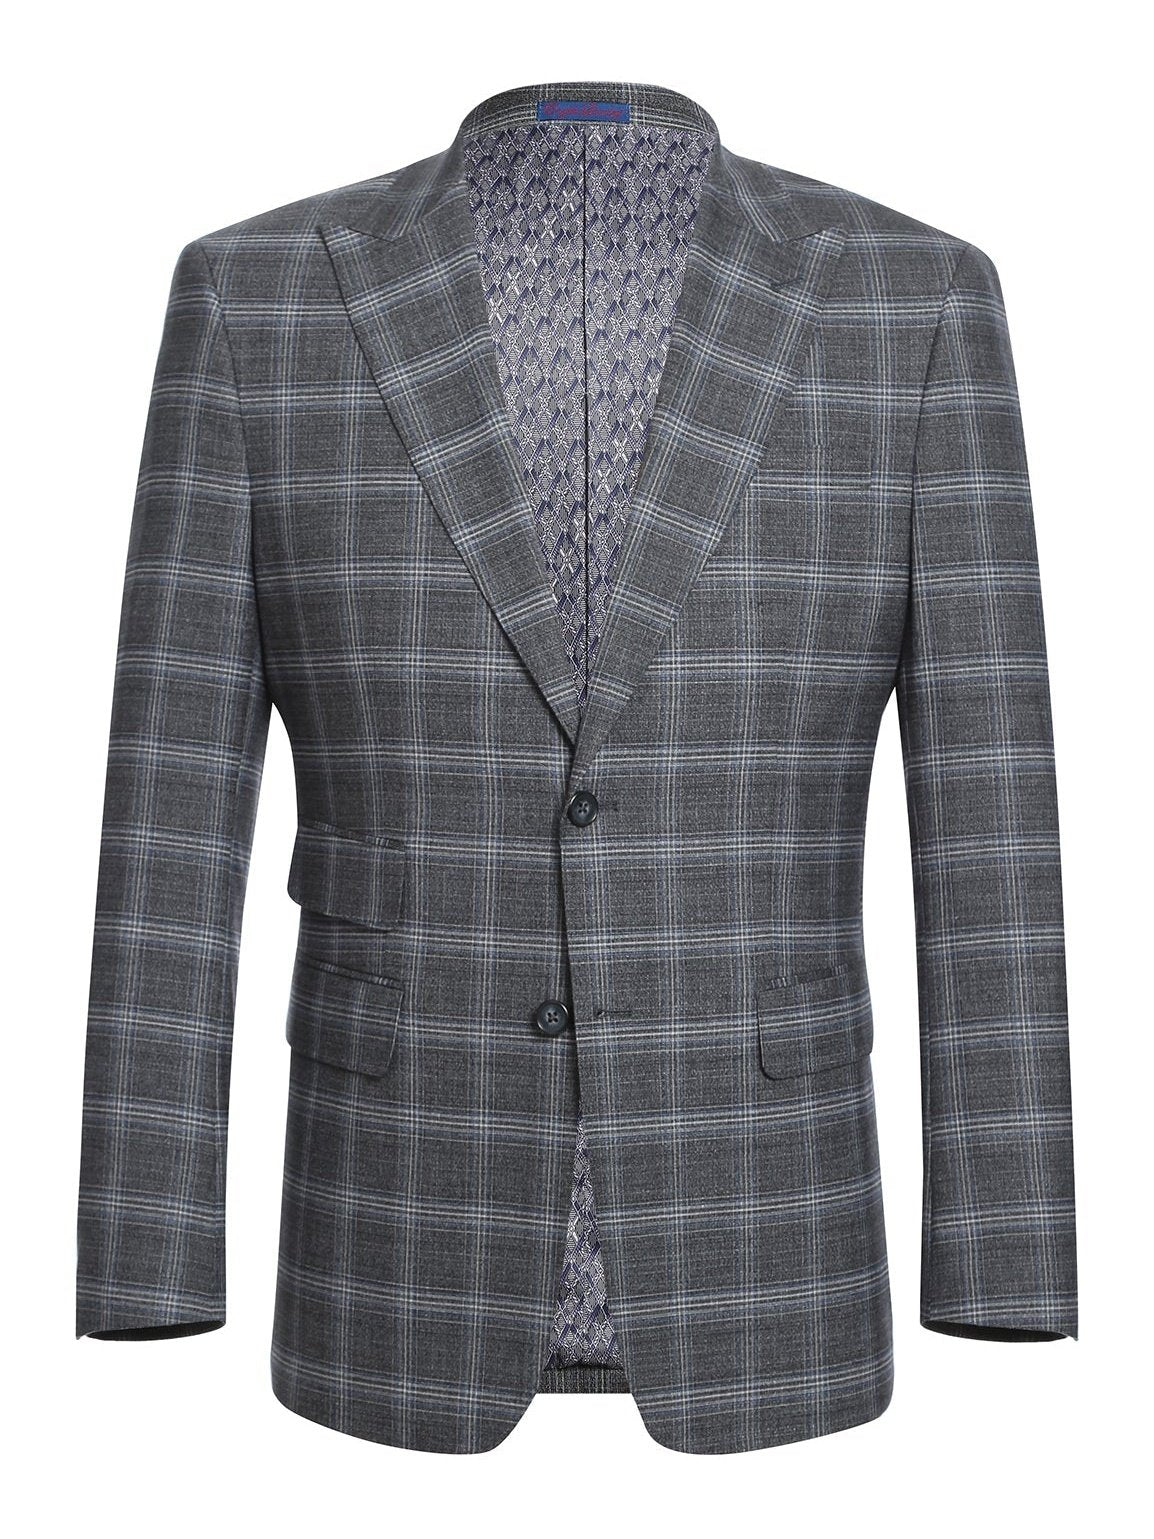 English Laundry Slim Fit Two Button Gray with White Blue Check Peak Lapel Suit